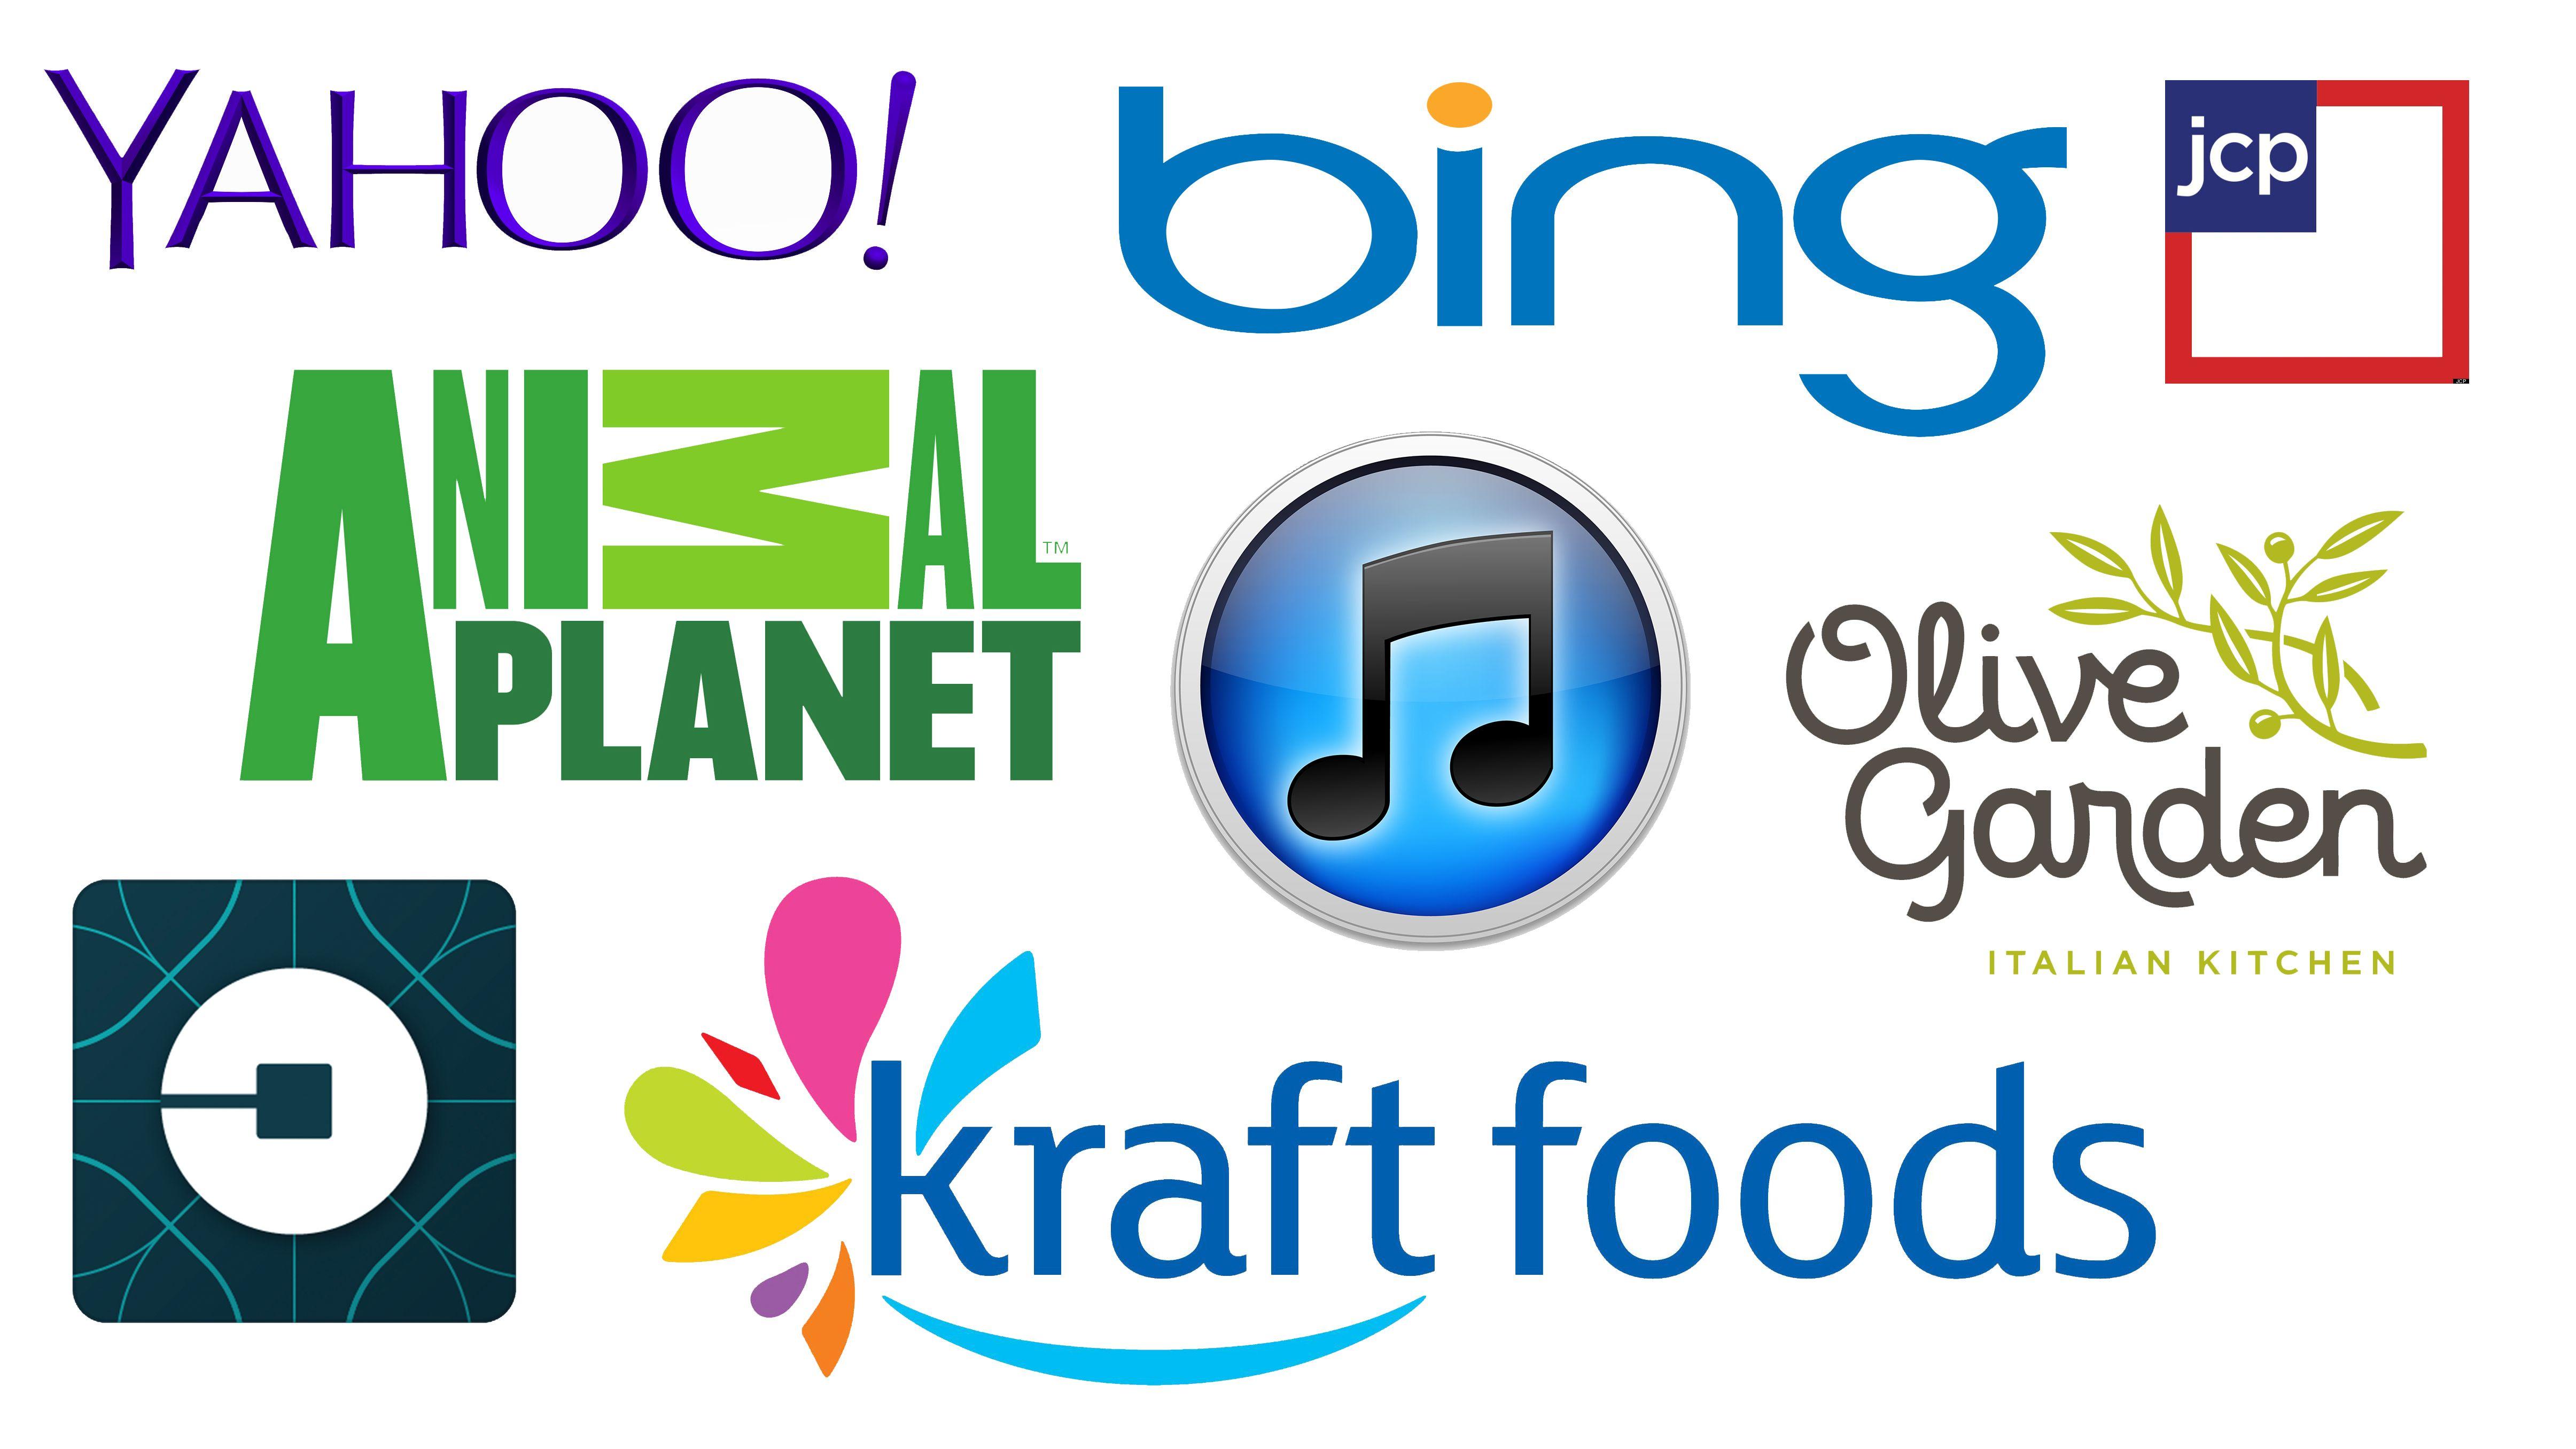 Designer of the Bing Logo - logos we all love to hate (and lessons we can learn)